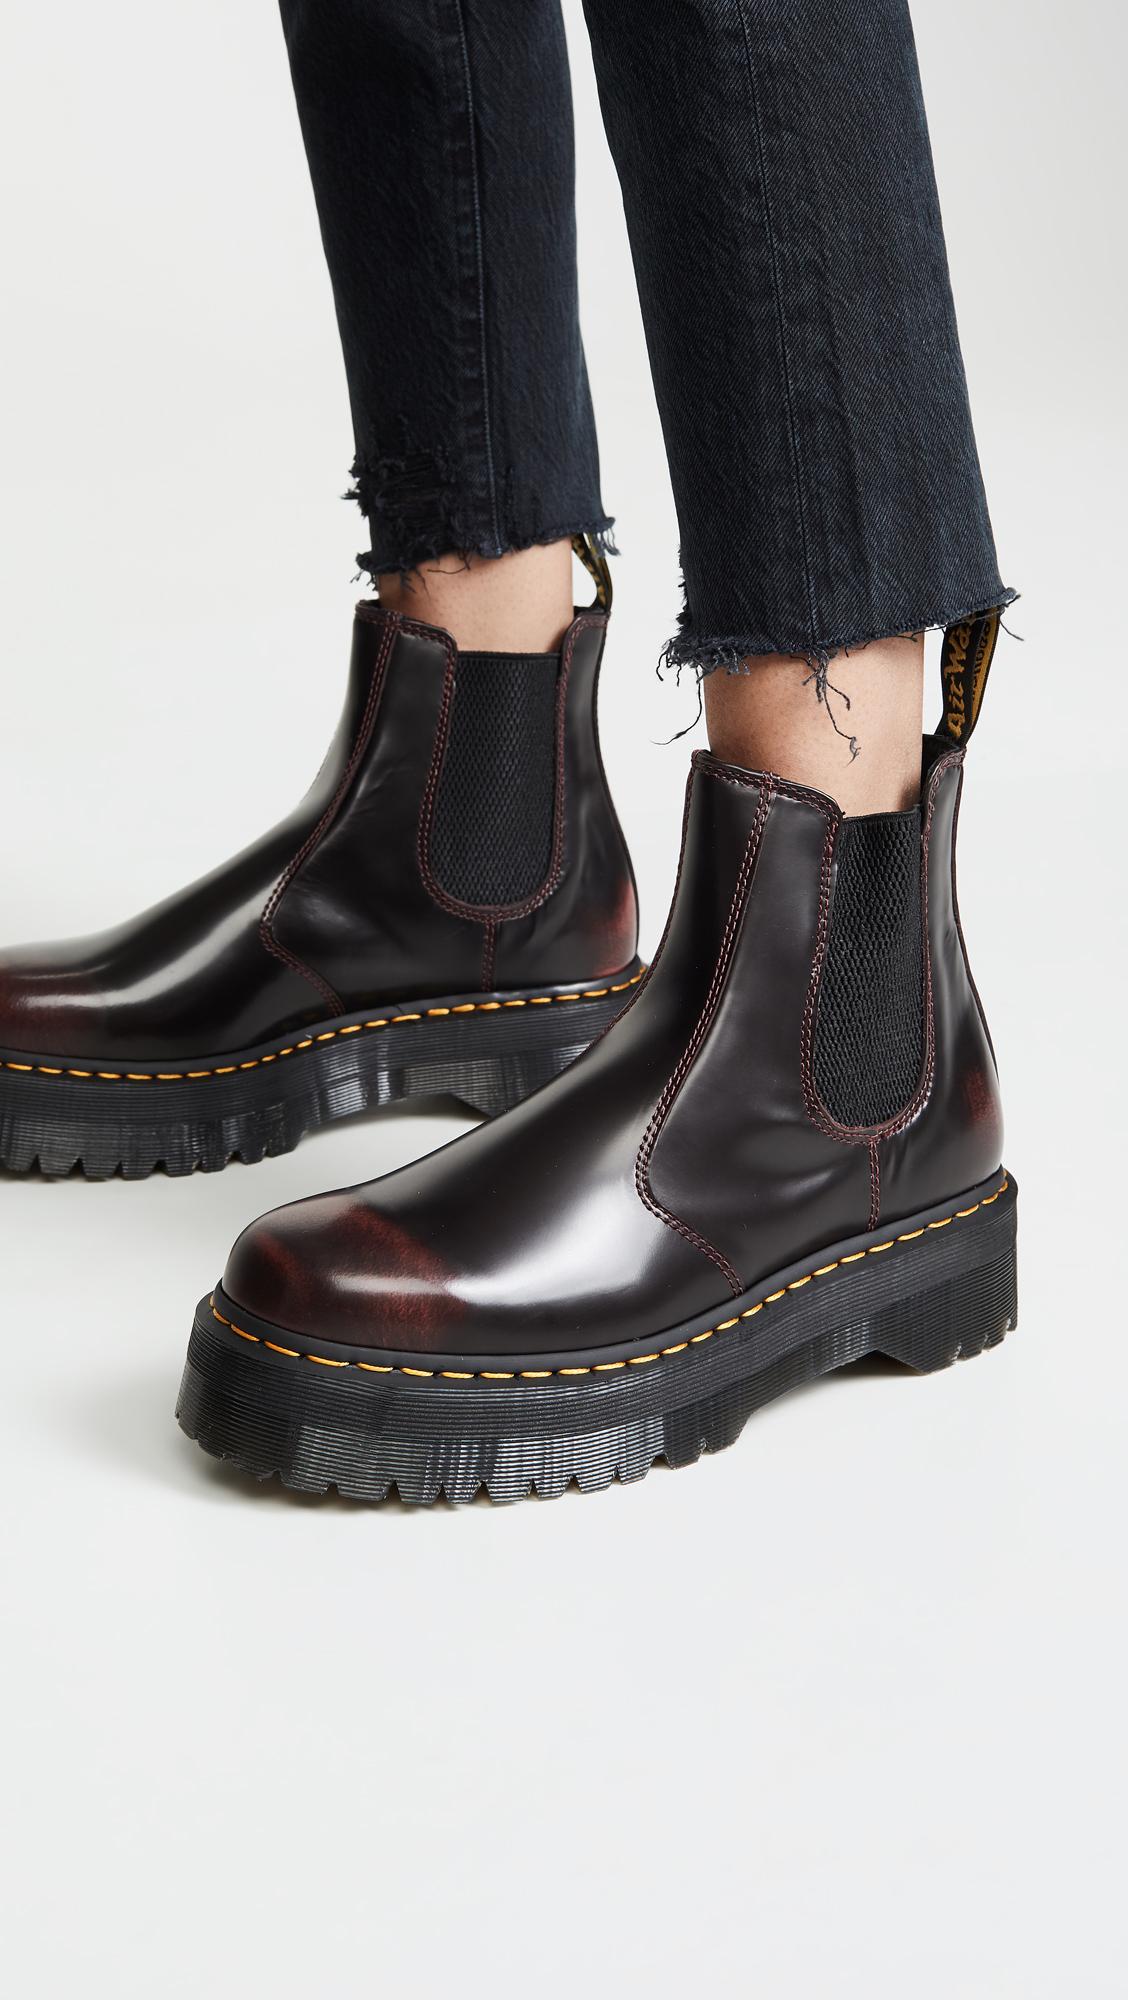 Dr. Martens 2976 Quad Chelsea Boots in Black | Lyst